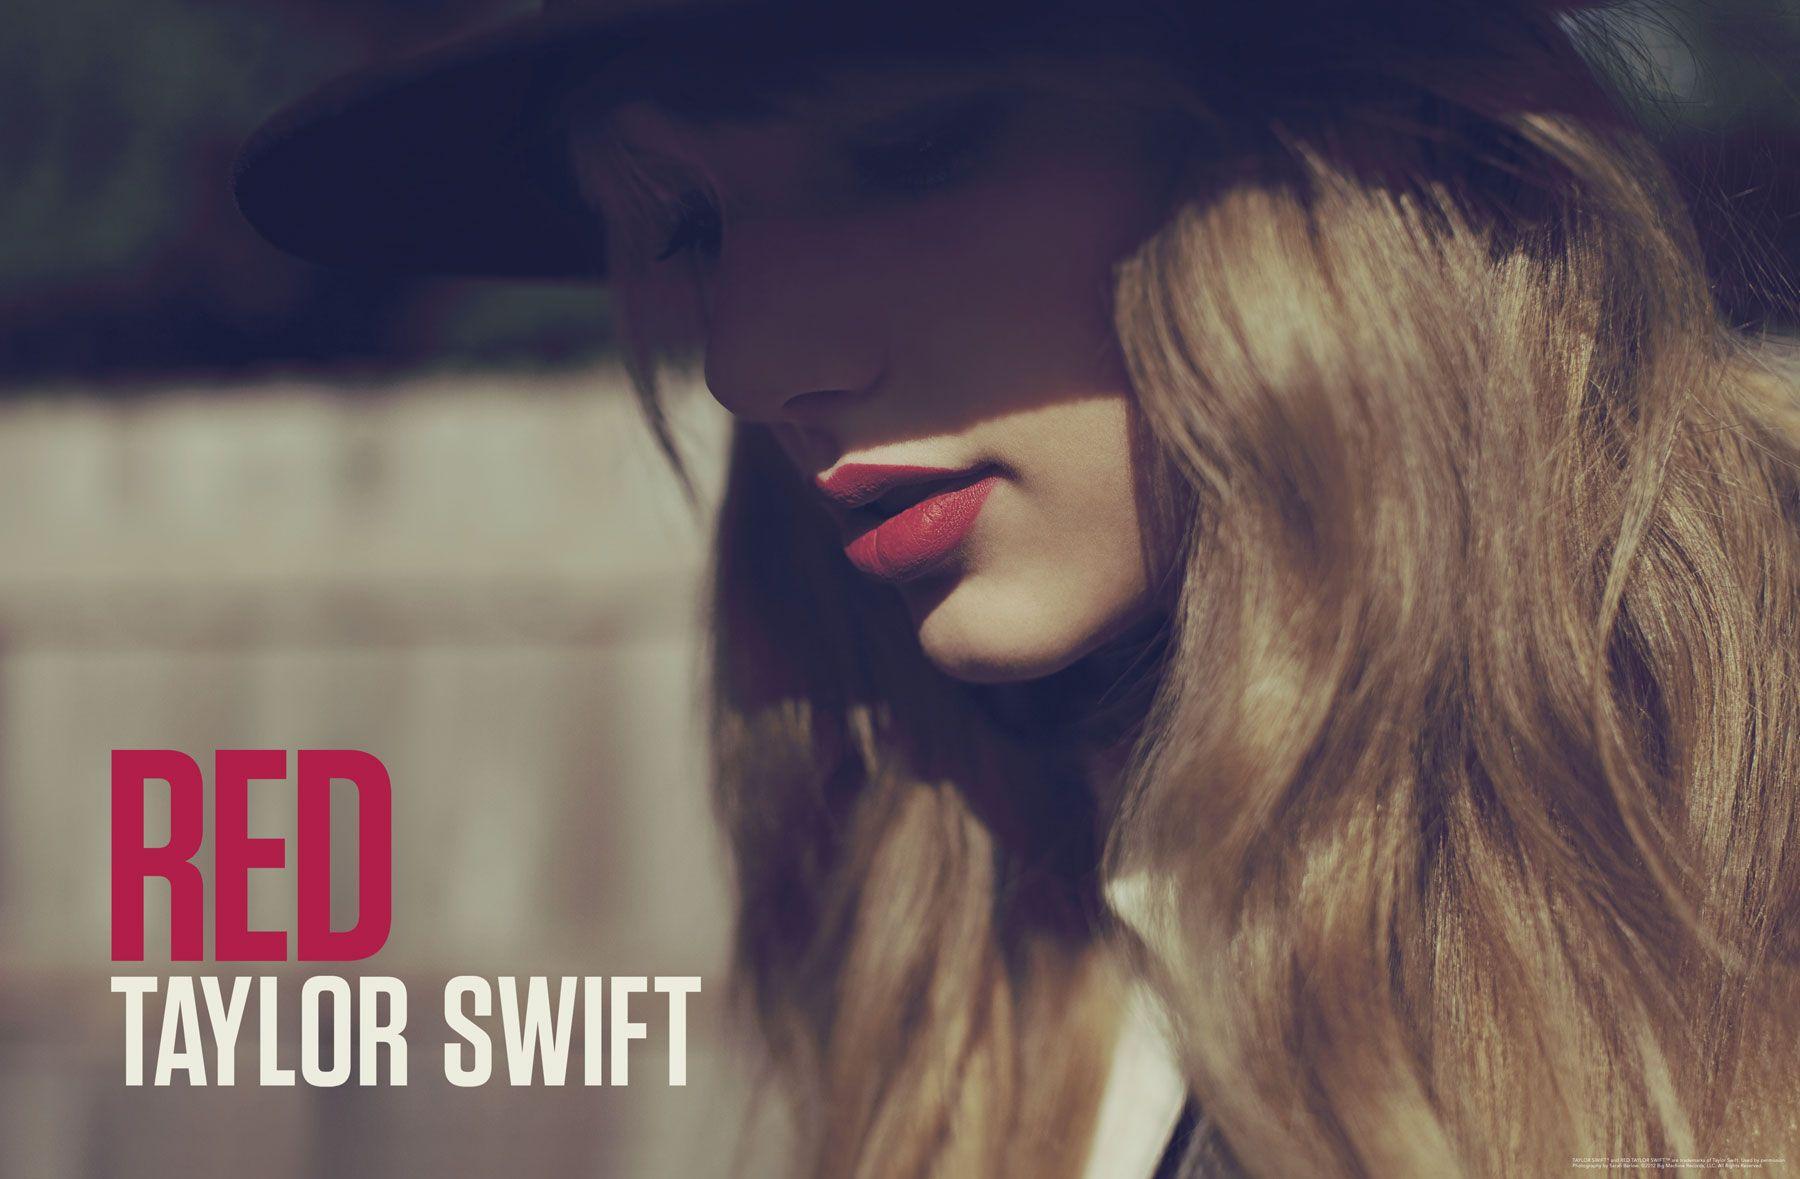 Wallpaper Taylor Swift Red